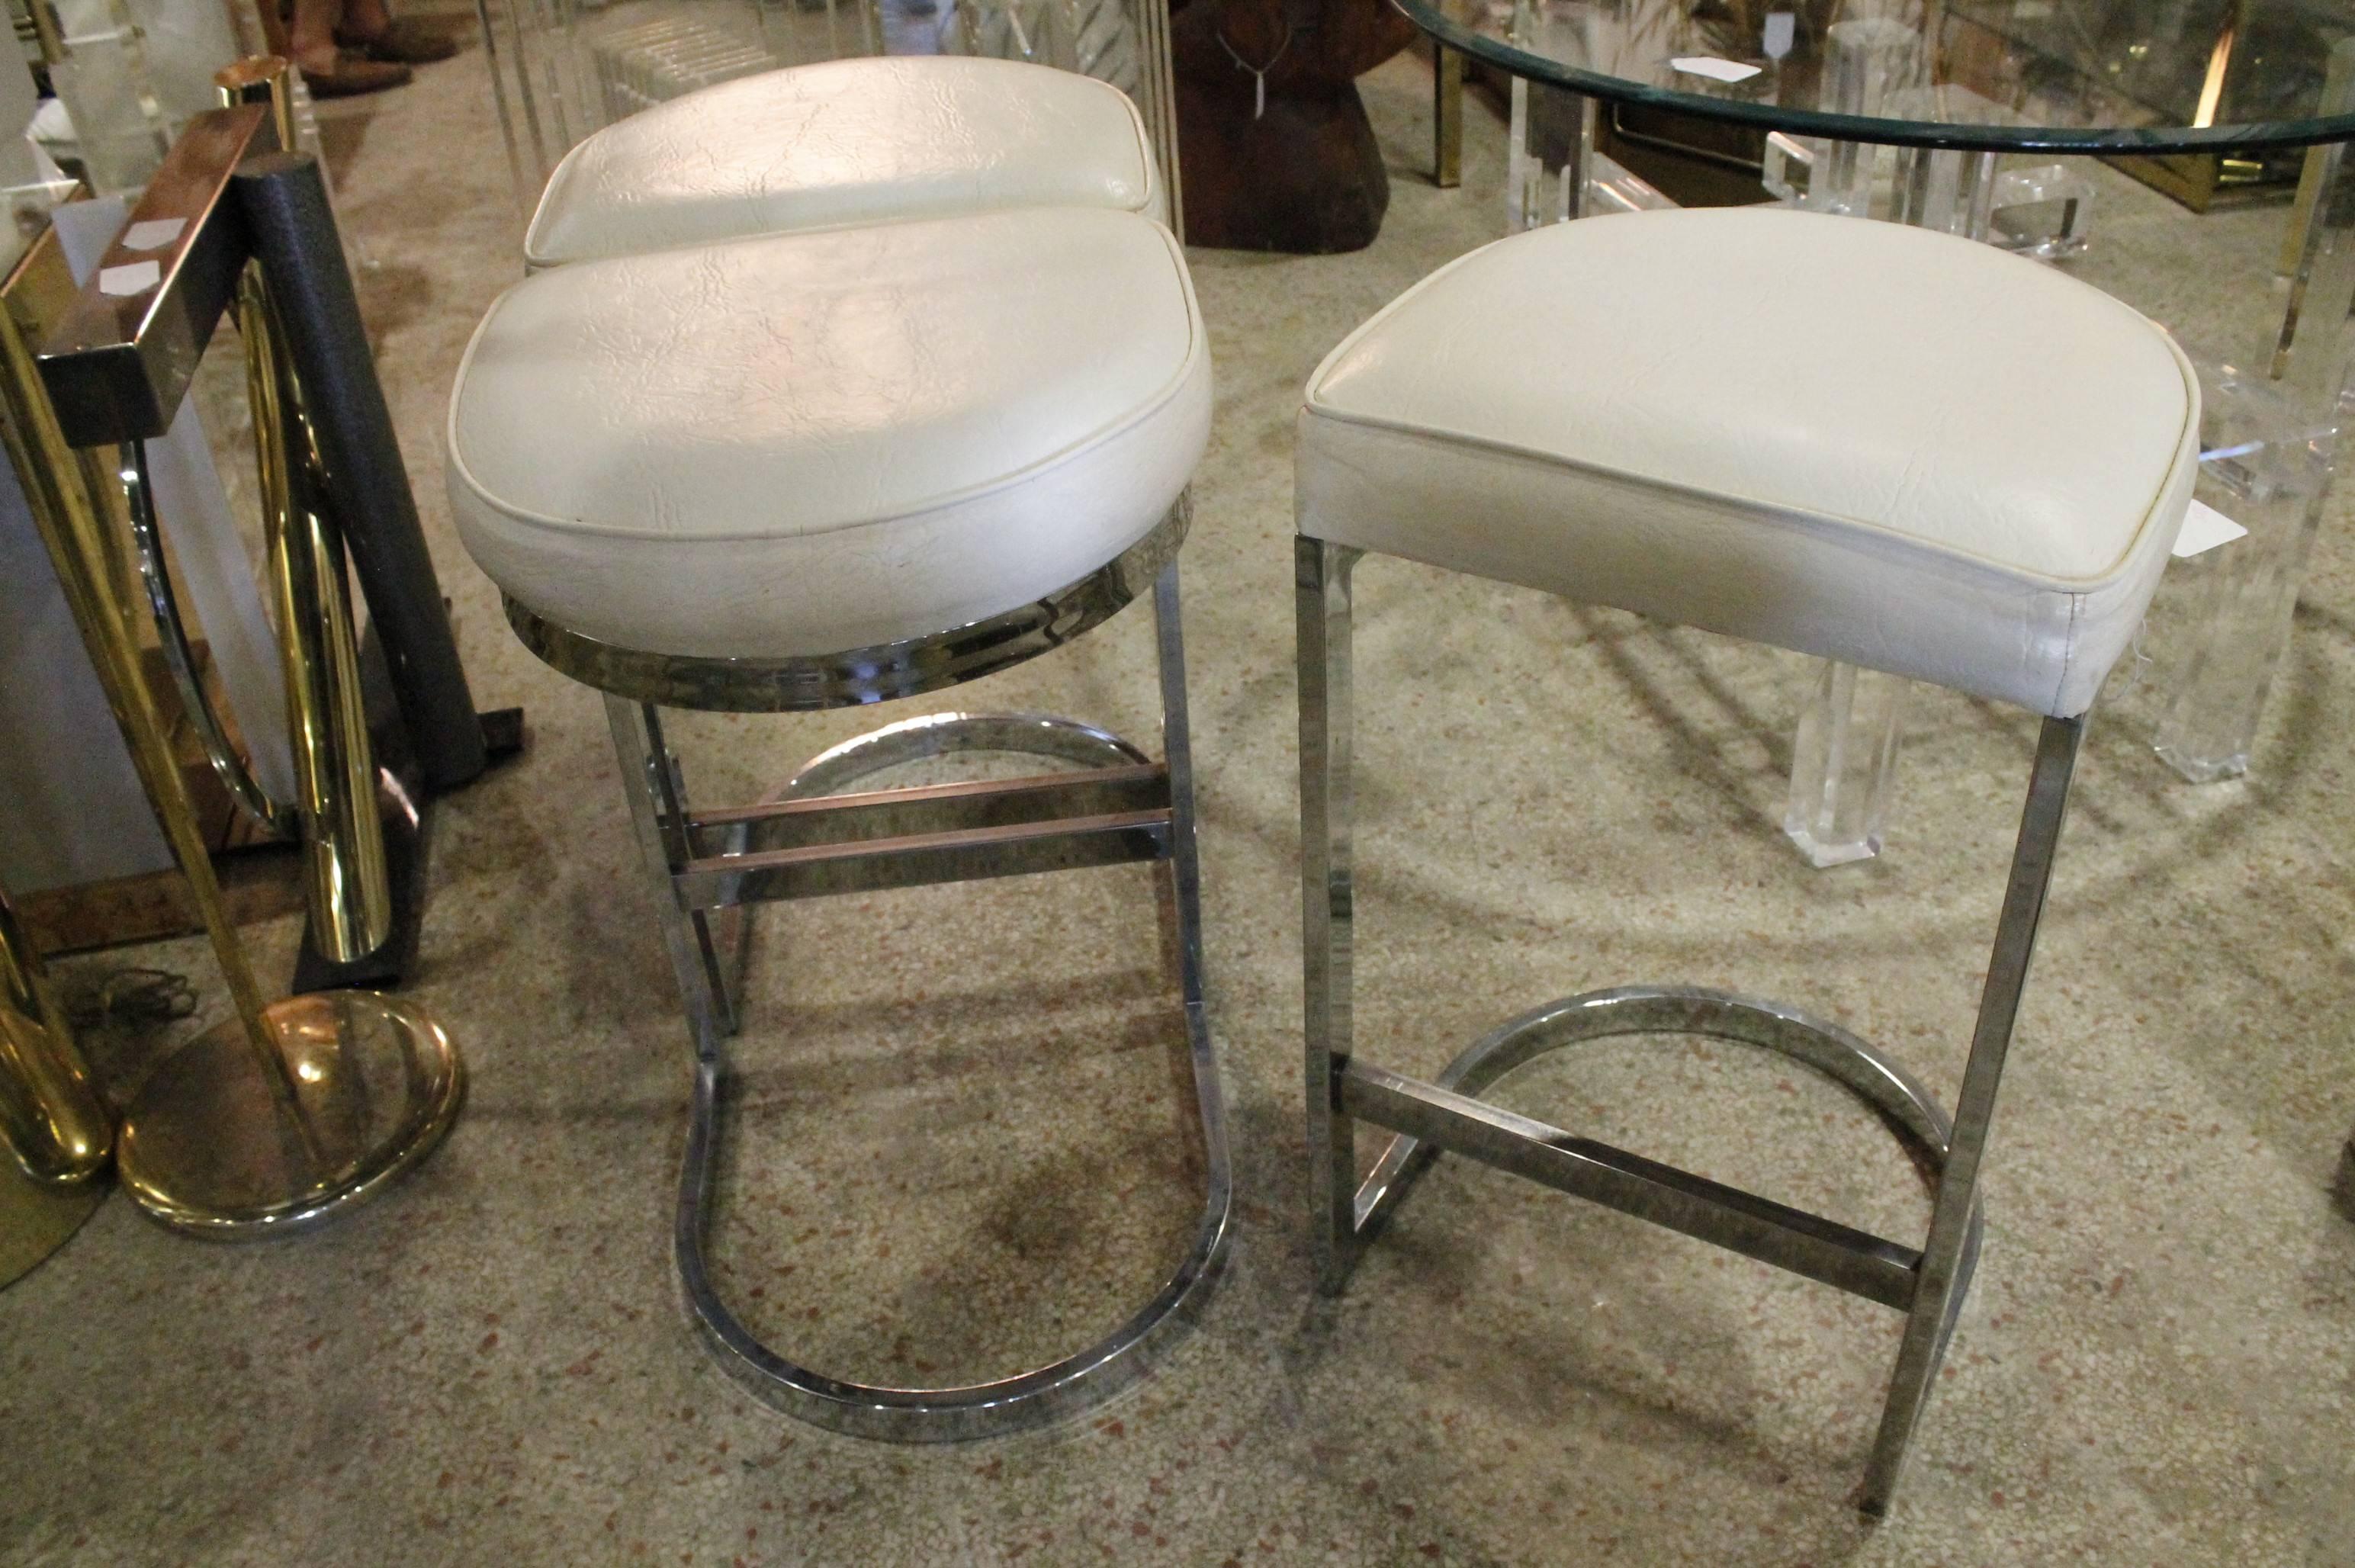 Vintage Set of three chrome cantilever barstools. The leather fabric is original but overall in good condition. The  chrome is in excellent condition. Tagged Dillingham. Dillingham by Milo Baughman.
Hollywood Regency, Mid Century Modern, Vintage,